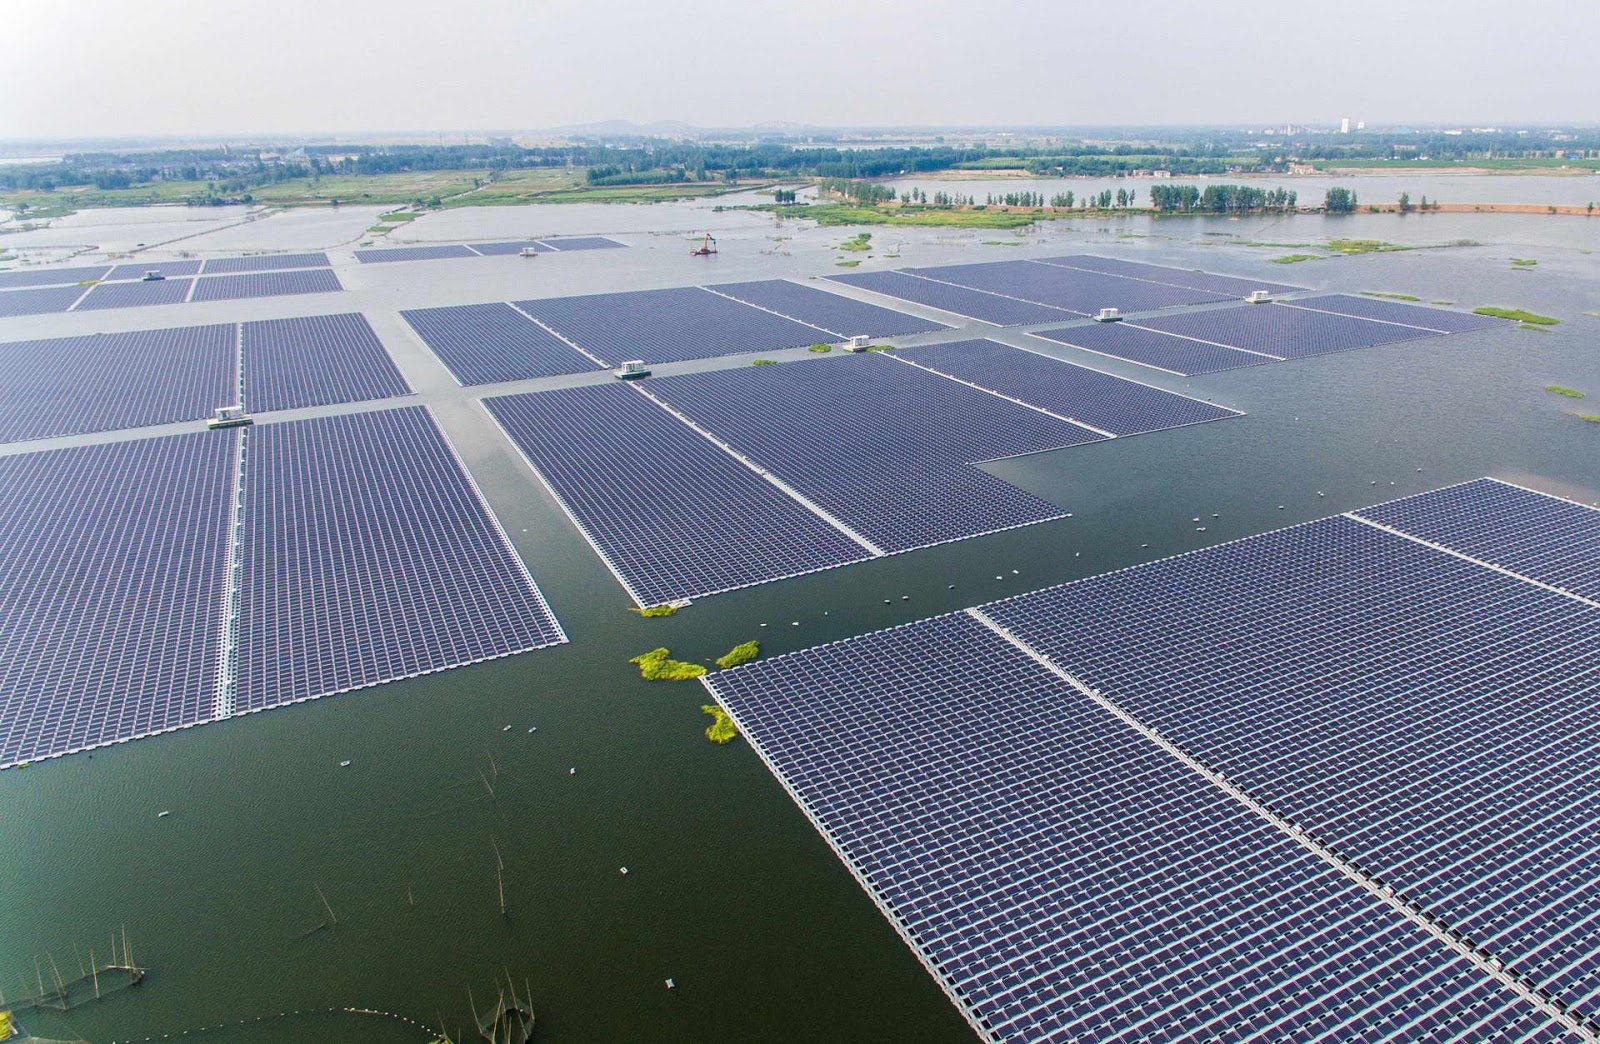 (FILES) This file photo taken on June 7, 2017 shows the world's largest floating solar power plant in a lake in Huainan, in China's central Anhui province.  
As the United States was withdrawing from the Paris climate pact, China's clean energy ambitions were being reflected in the launch of the world's largest floating solar farm. The 40-megawatt power plant has 160,000 panels resting on a lake that emerged after the collapse of a coal mine in central Anhui province. It is part of Beijing's effort to wean itself off a fossil fuel dependency that has made it the world's top carbon emitter, with two-thirds of its electricity still fuelled by coal. / AFP PHOTO / STR / China OUT / TO GO WITH AFP STORY CHINA-DIPLOMACY-ENERGY-CLIMATE-US,FOCUS BY JULIEN GIRAULT